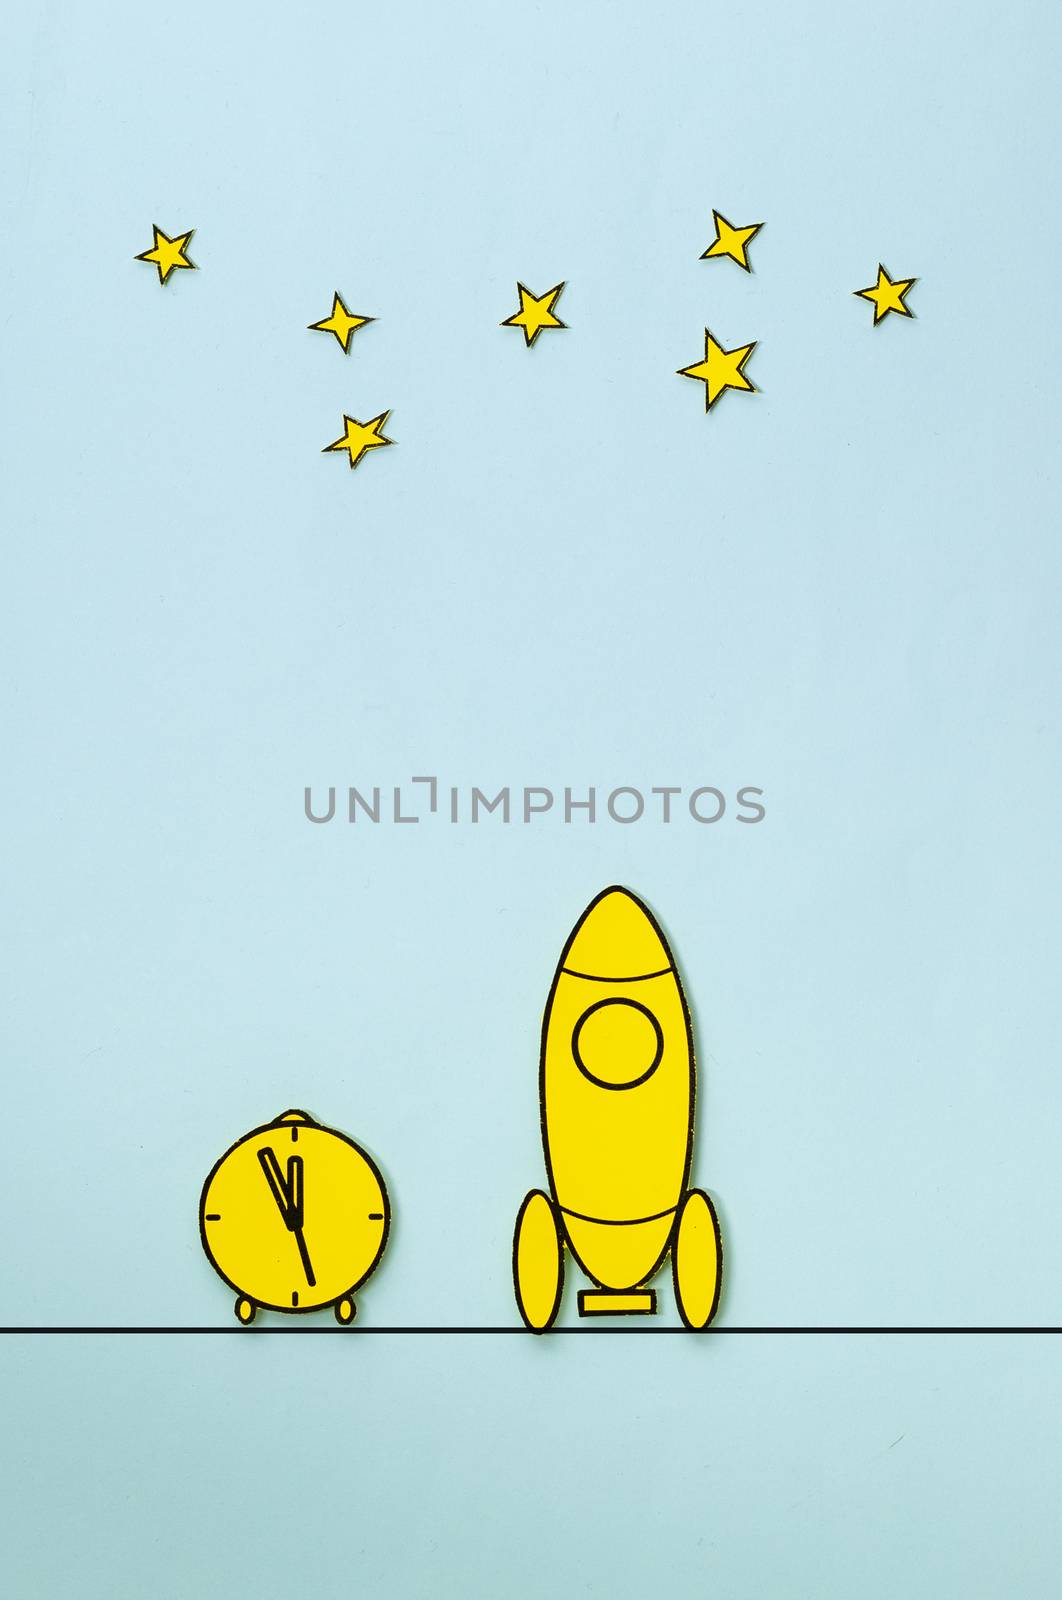 Countdown to the launch of a yellow rocket standing on a launch pad with an alarm clock pointing to the stars above, llustration